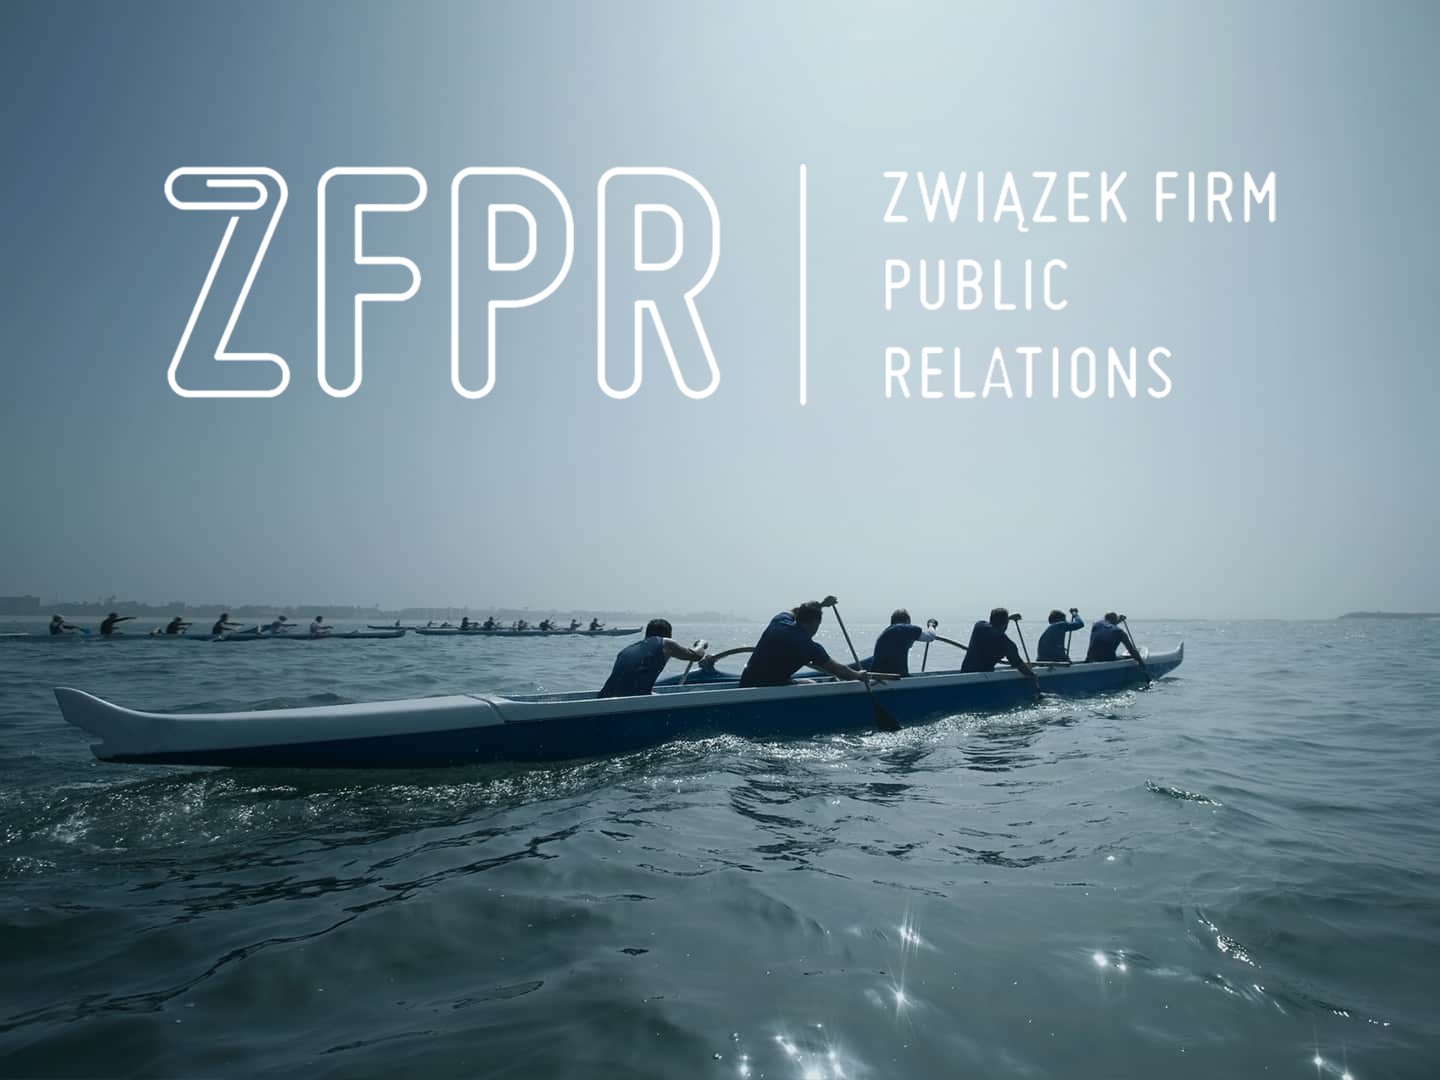 M+G joins ZFPR